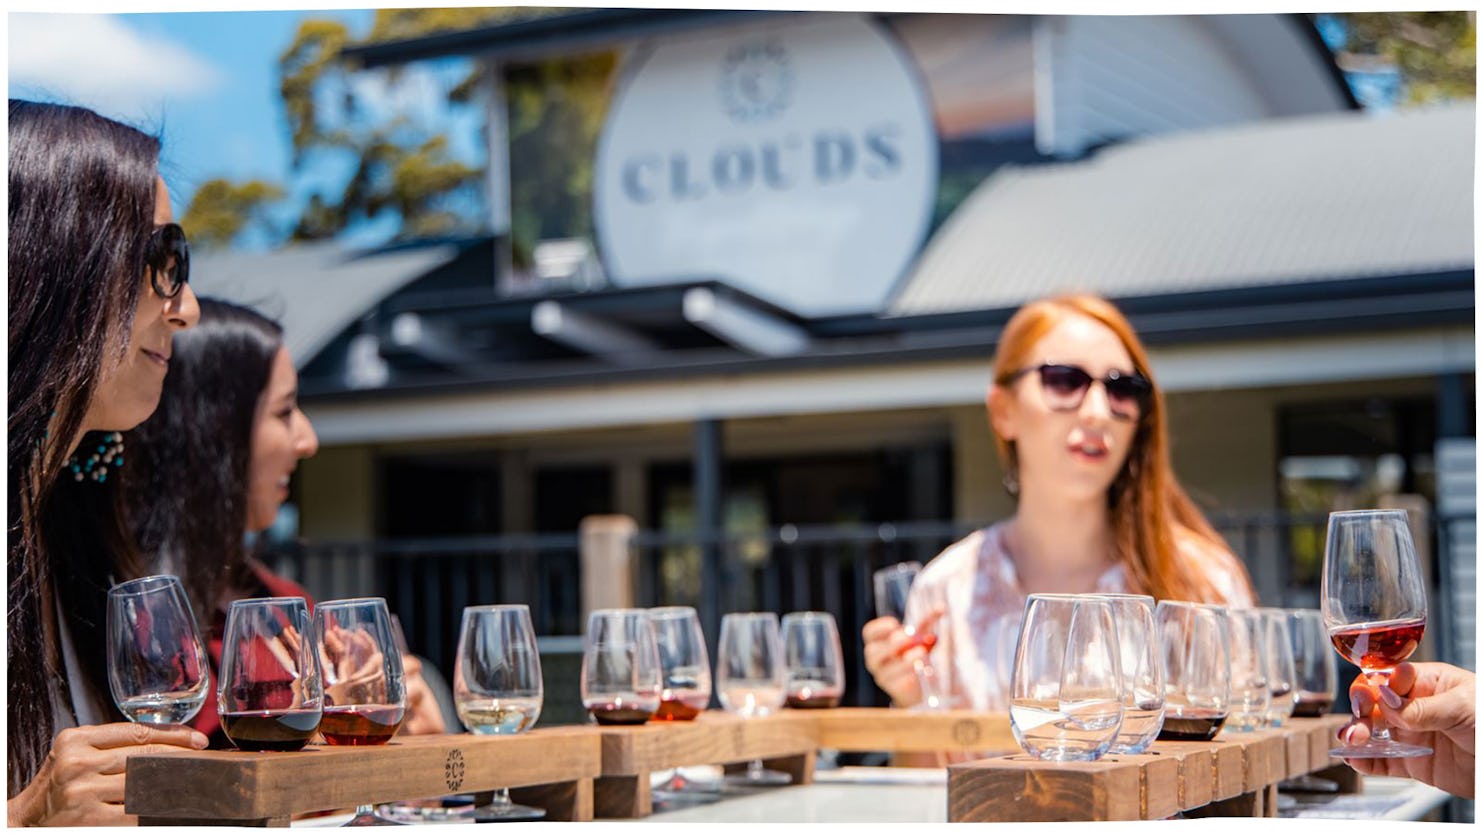 The Barrel at Clouds Vineyard in Maleny stocks wines from across South East Queensland